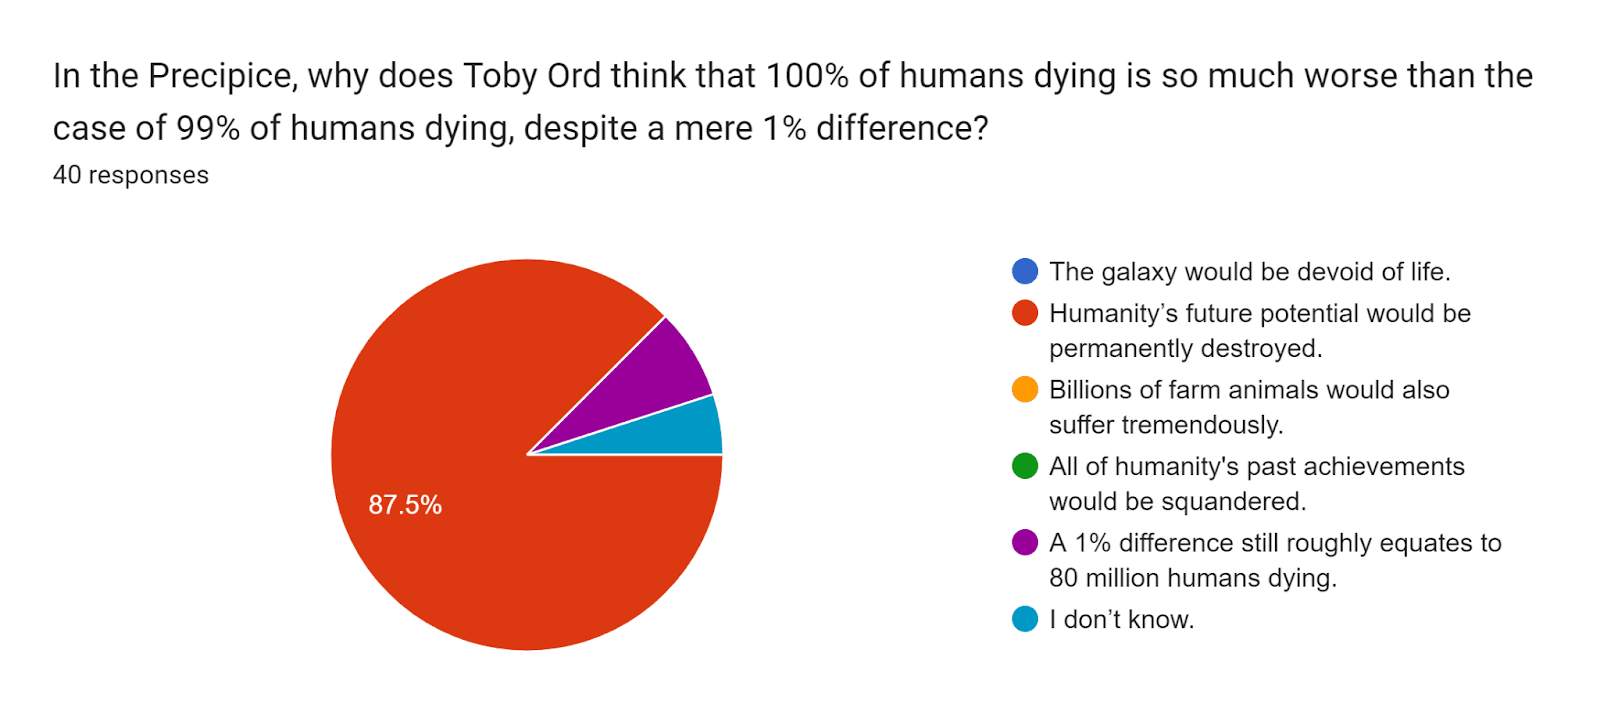 Forms response chart. Question title: In the Precipice, why does Toby Ord think that 100% of humans dying is so much worse than the case of 99% of humans dying, despite a mere 1% difference?
. Number of responses: 40 responses.